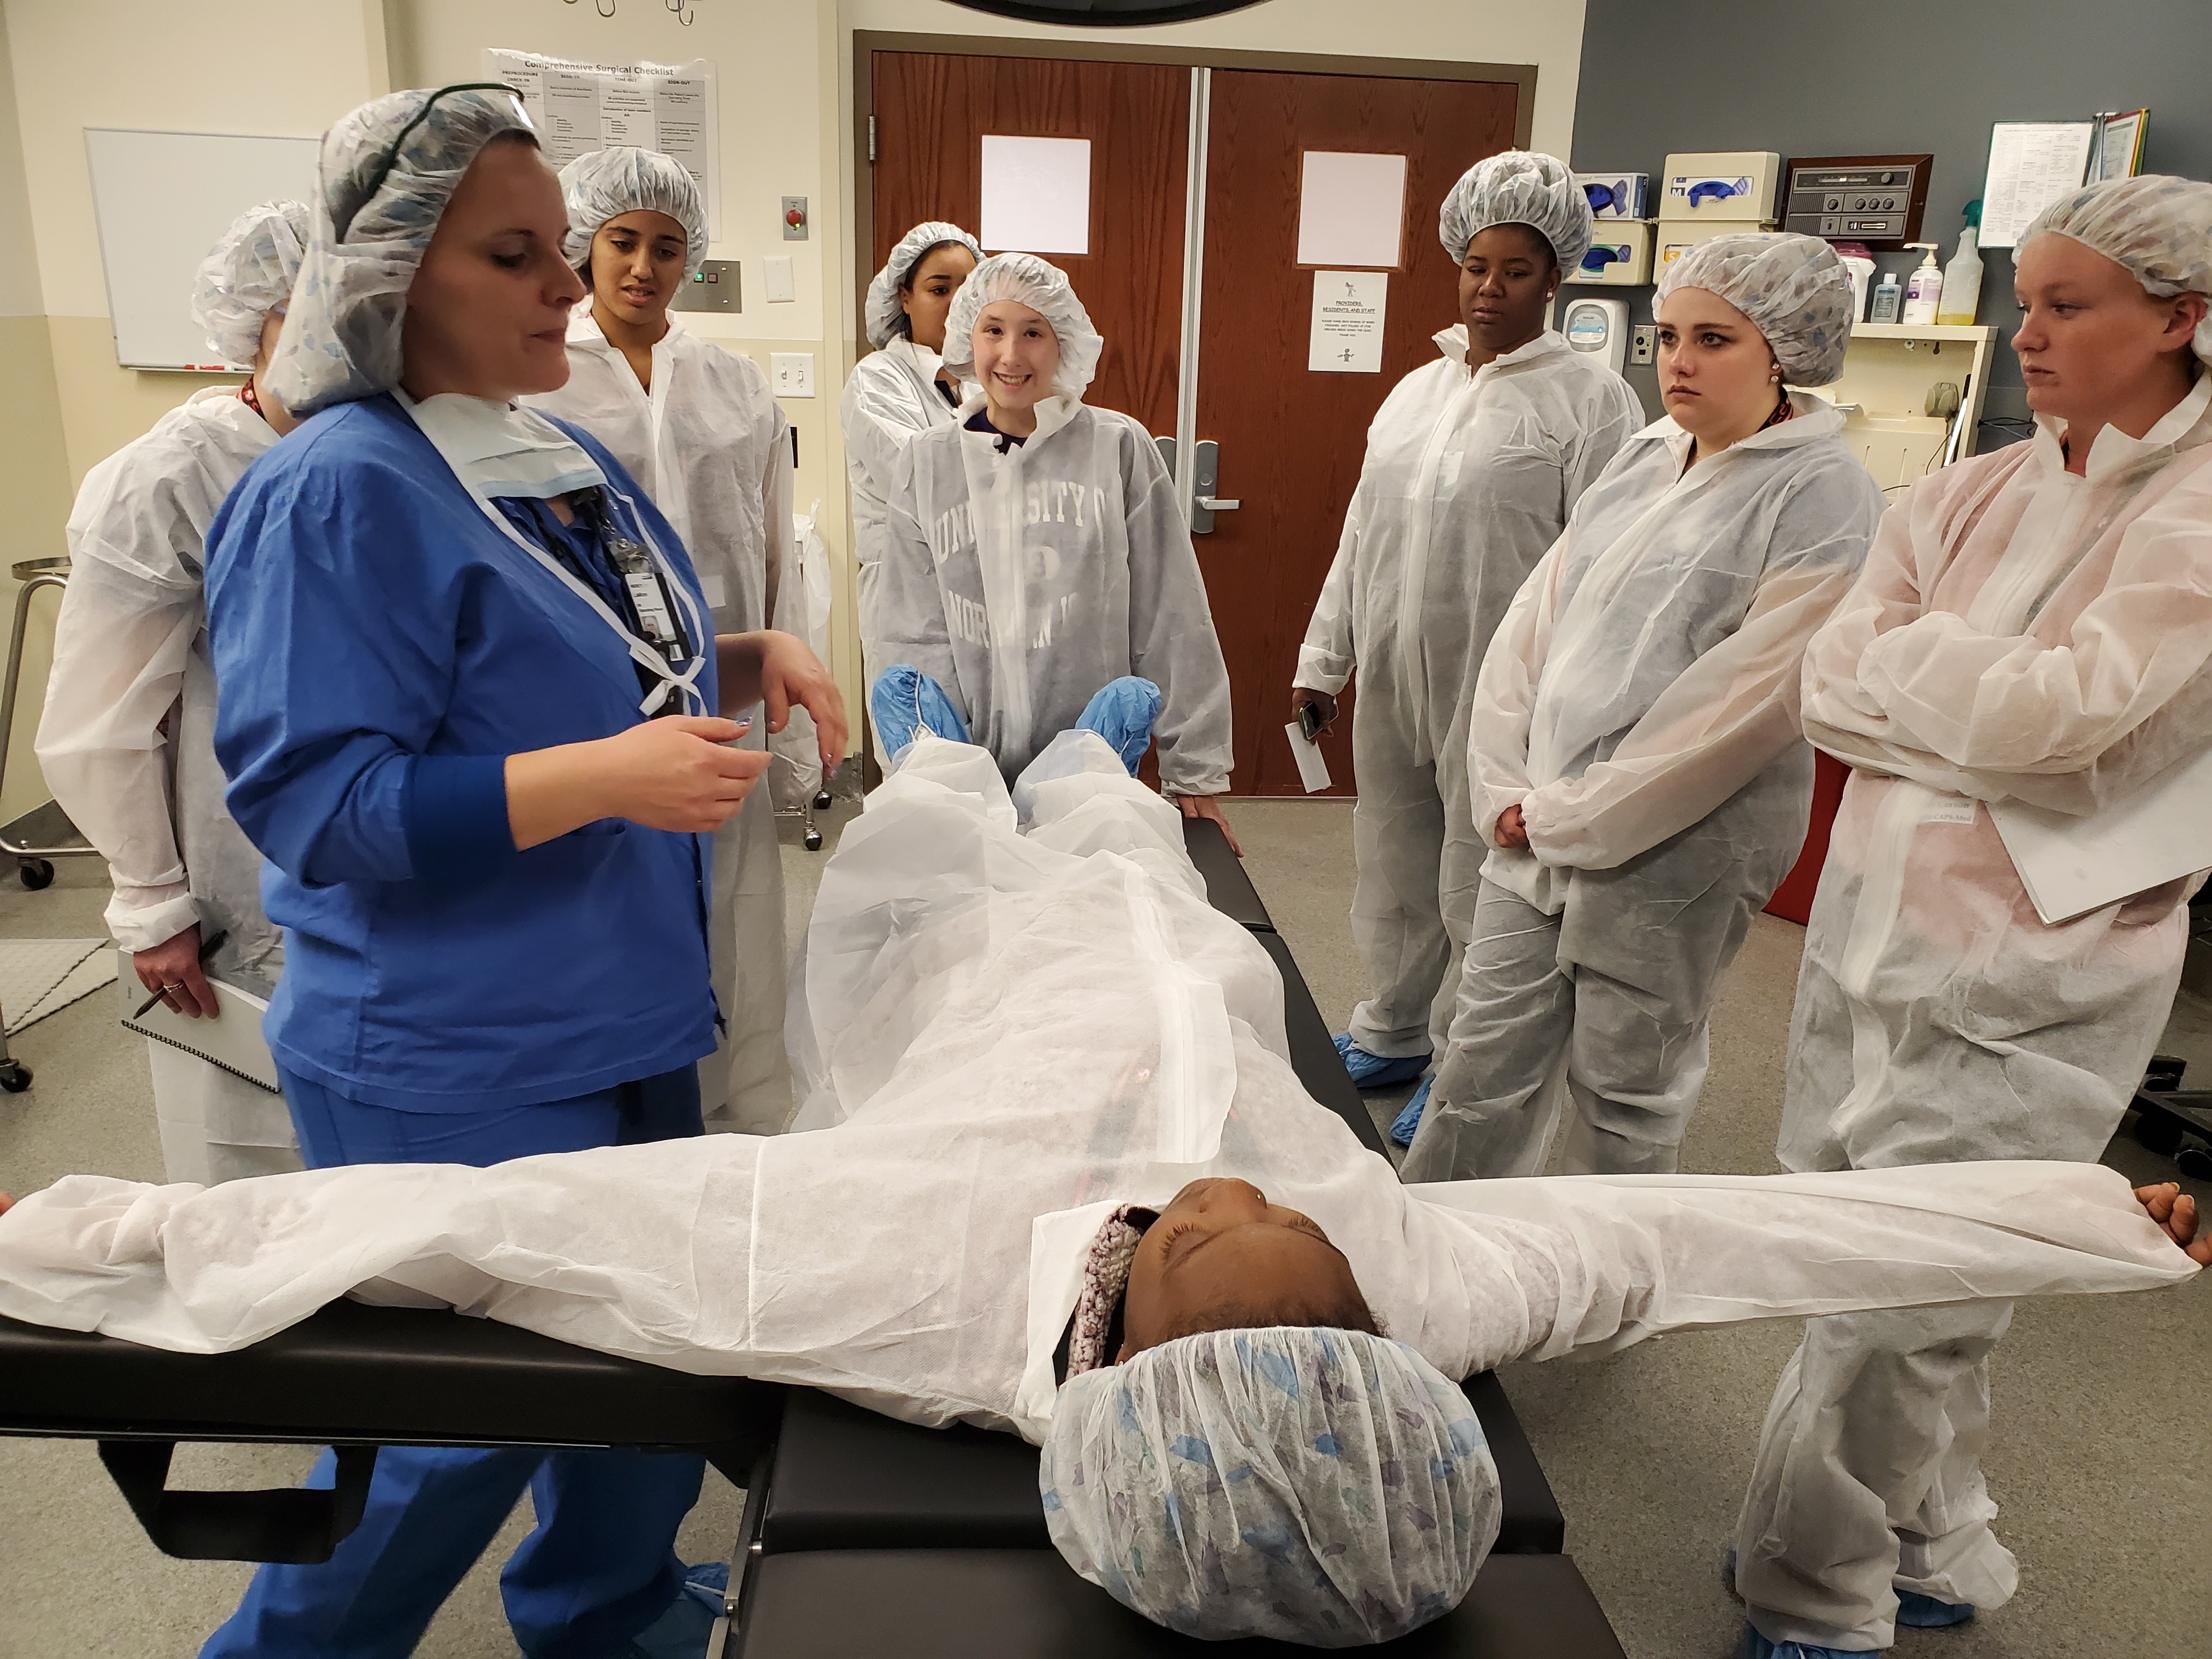 STEM BEST Program students explore opportunities available in the local healthcare industry.